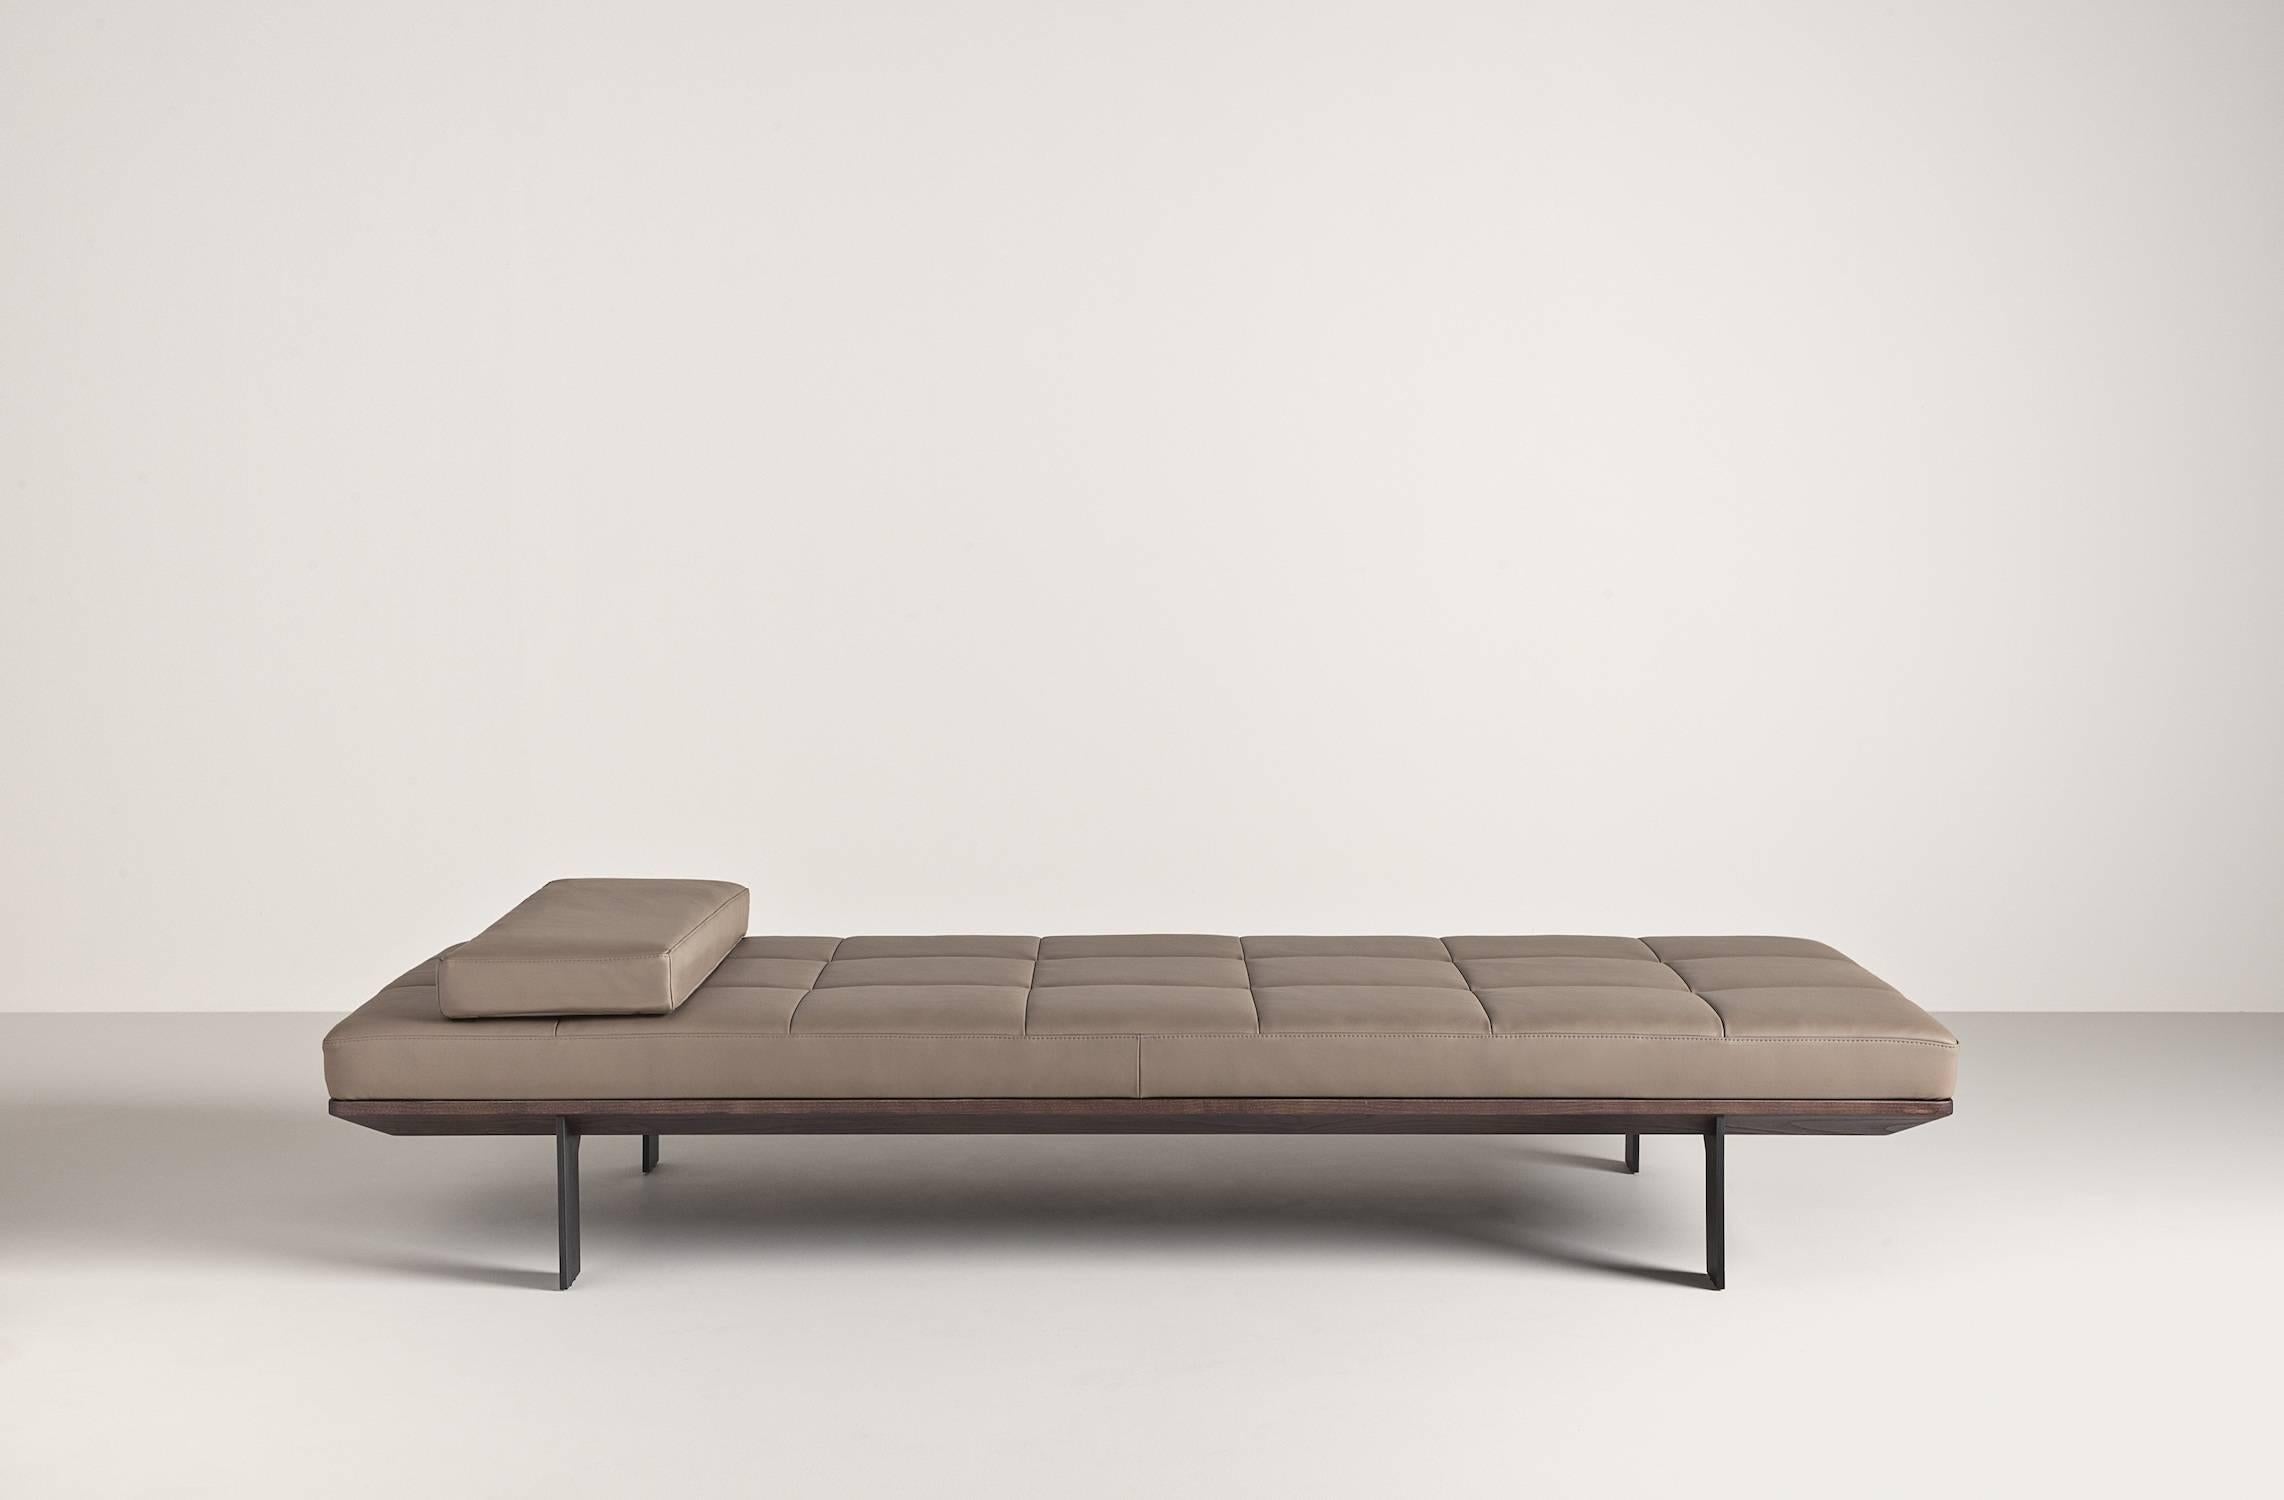 Hudson Daybed in Leather, Steel and Wood by Gordon Guillaumier In New Condition For Sale In Rhinebeck, NY